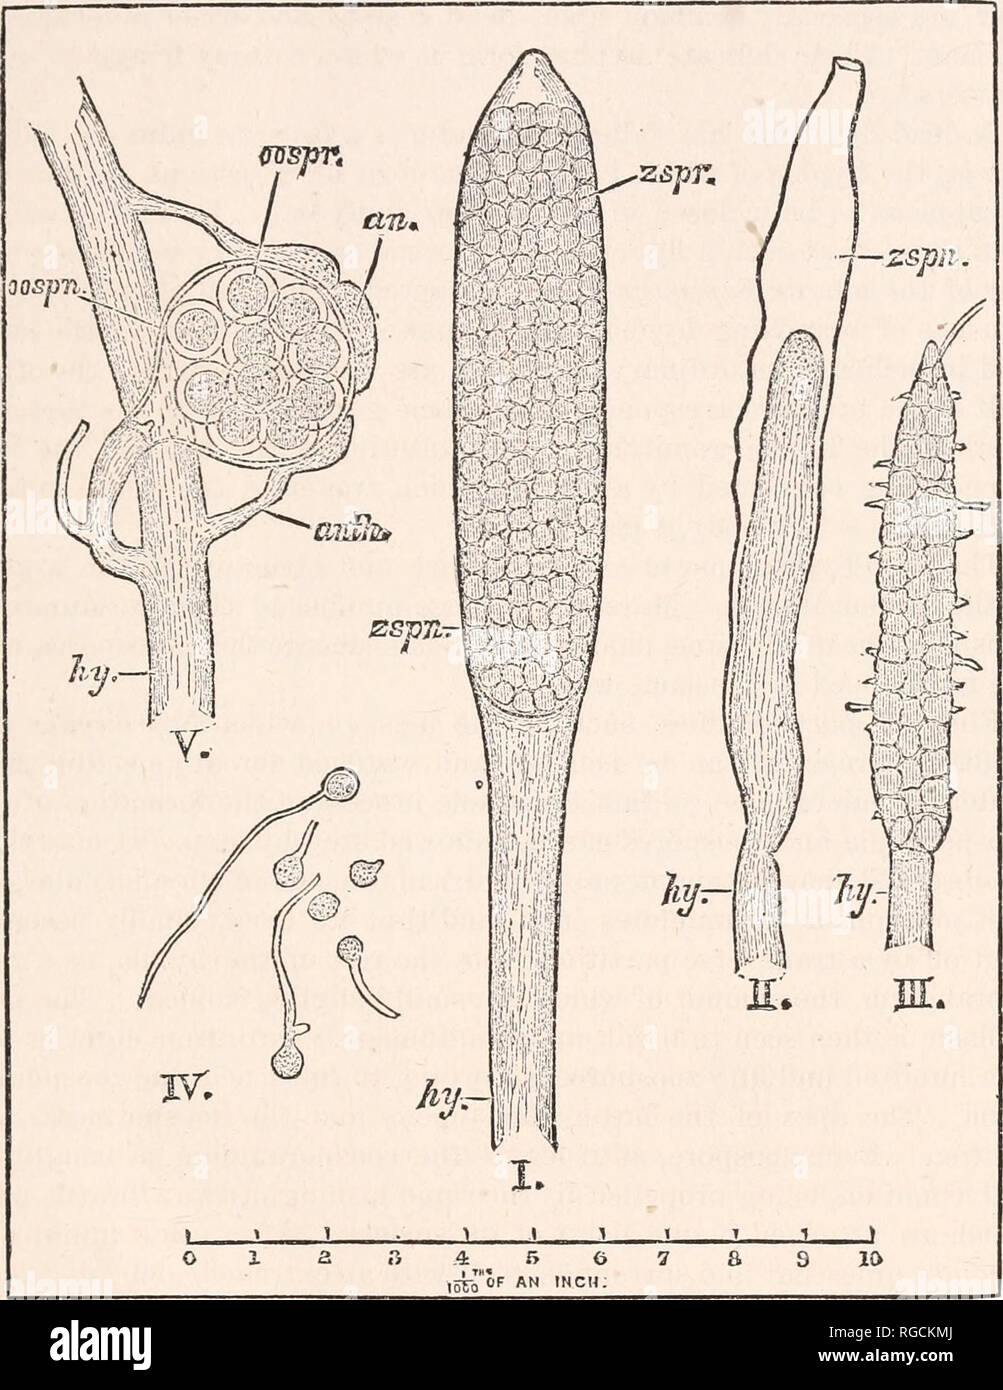 . Bulletin of the United States Fish Commission. Fisheries -- United States; Fish-culture -- United States. BULLETIN OF THE UNITED STATES FISH COMMISSION. 433 and Brefeld,* a great amount of accurate information respecting the Saprolegniwhas been accumulated of late years.. CHARACTERISTIC FORMS OF THE SPORANGIA AXU SPOKES OF SAPKOLEGNIA. I. —A zoosprangium full of nearly ripe, zoospores from the skin of a living diseased salmon. II.—An empty zoosporangium, through the center of which the hypha is growing in order to pro duce a new zoosporanginm. From the fresh growth of Saprolegnia on the dise Stock Photo